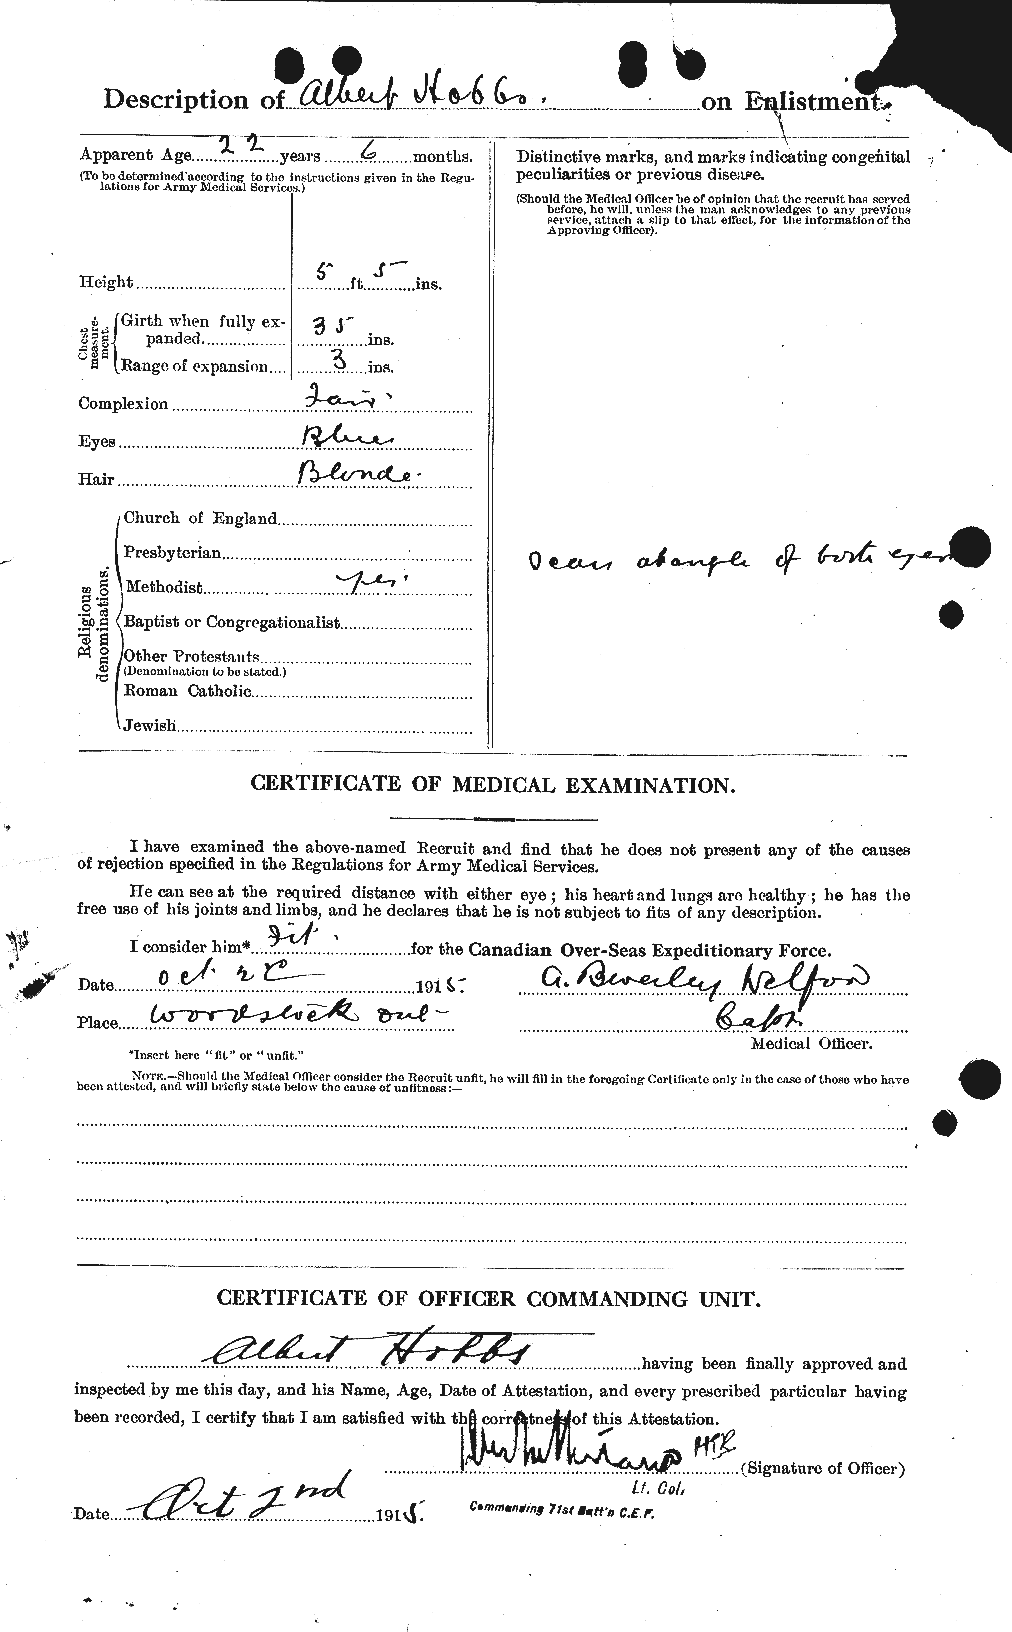 Personnel Records of the First World War - CEF 394900b